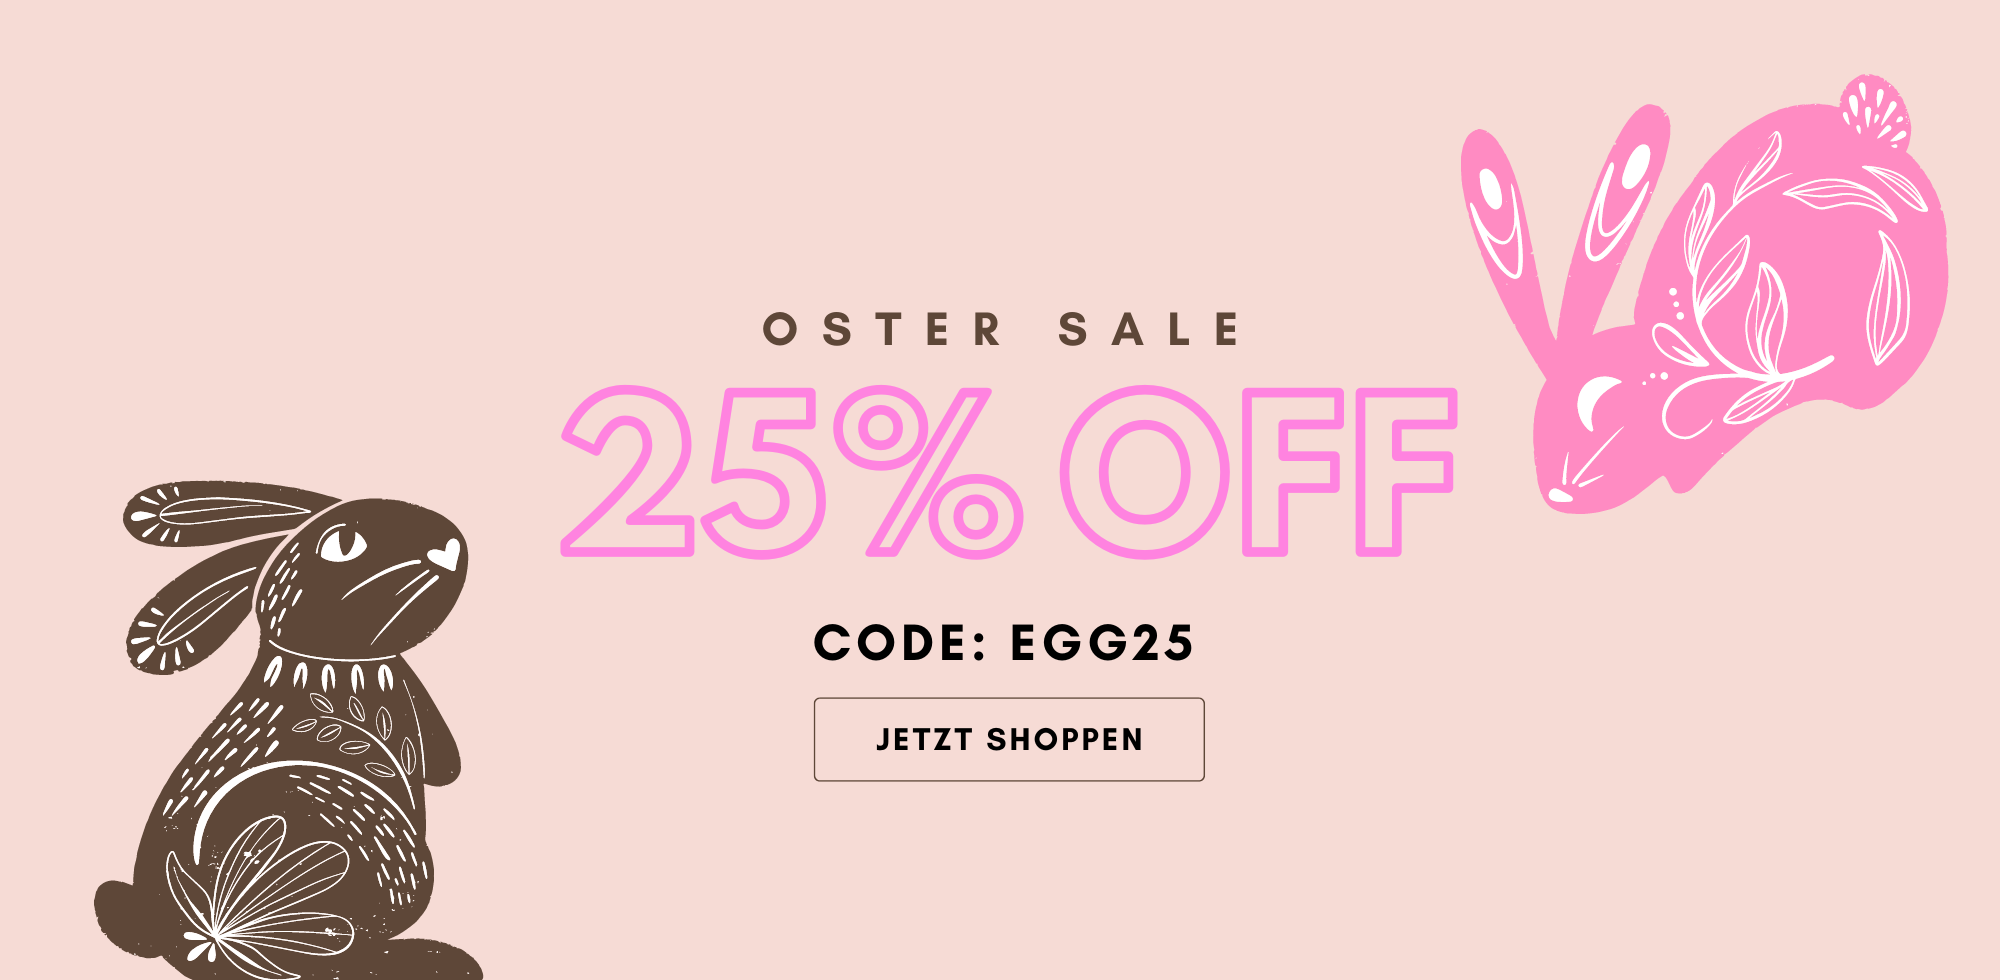 Oster Sale 25% Off mit Code EGG25